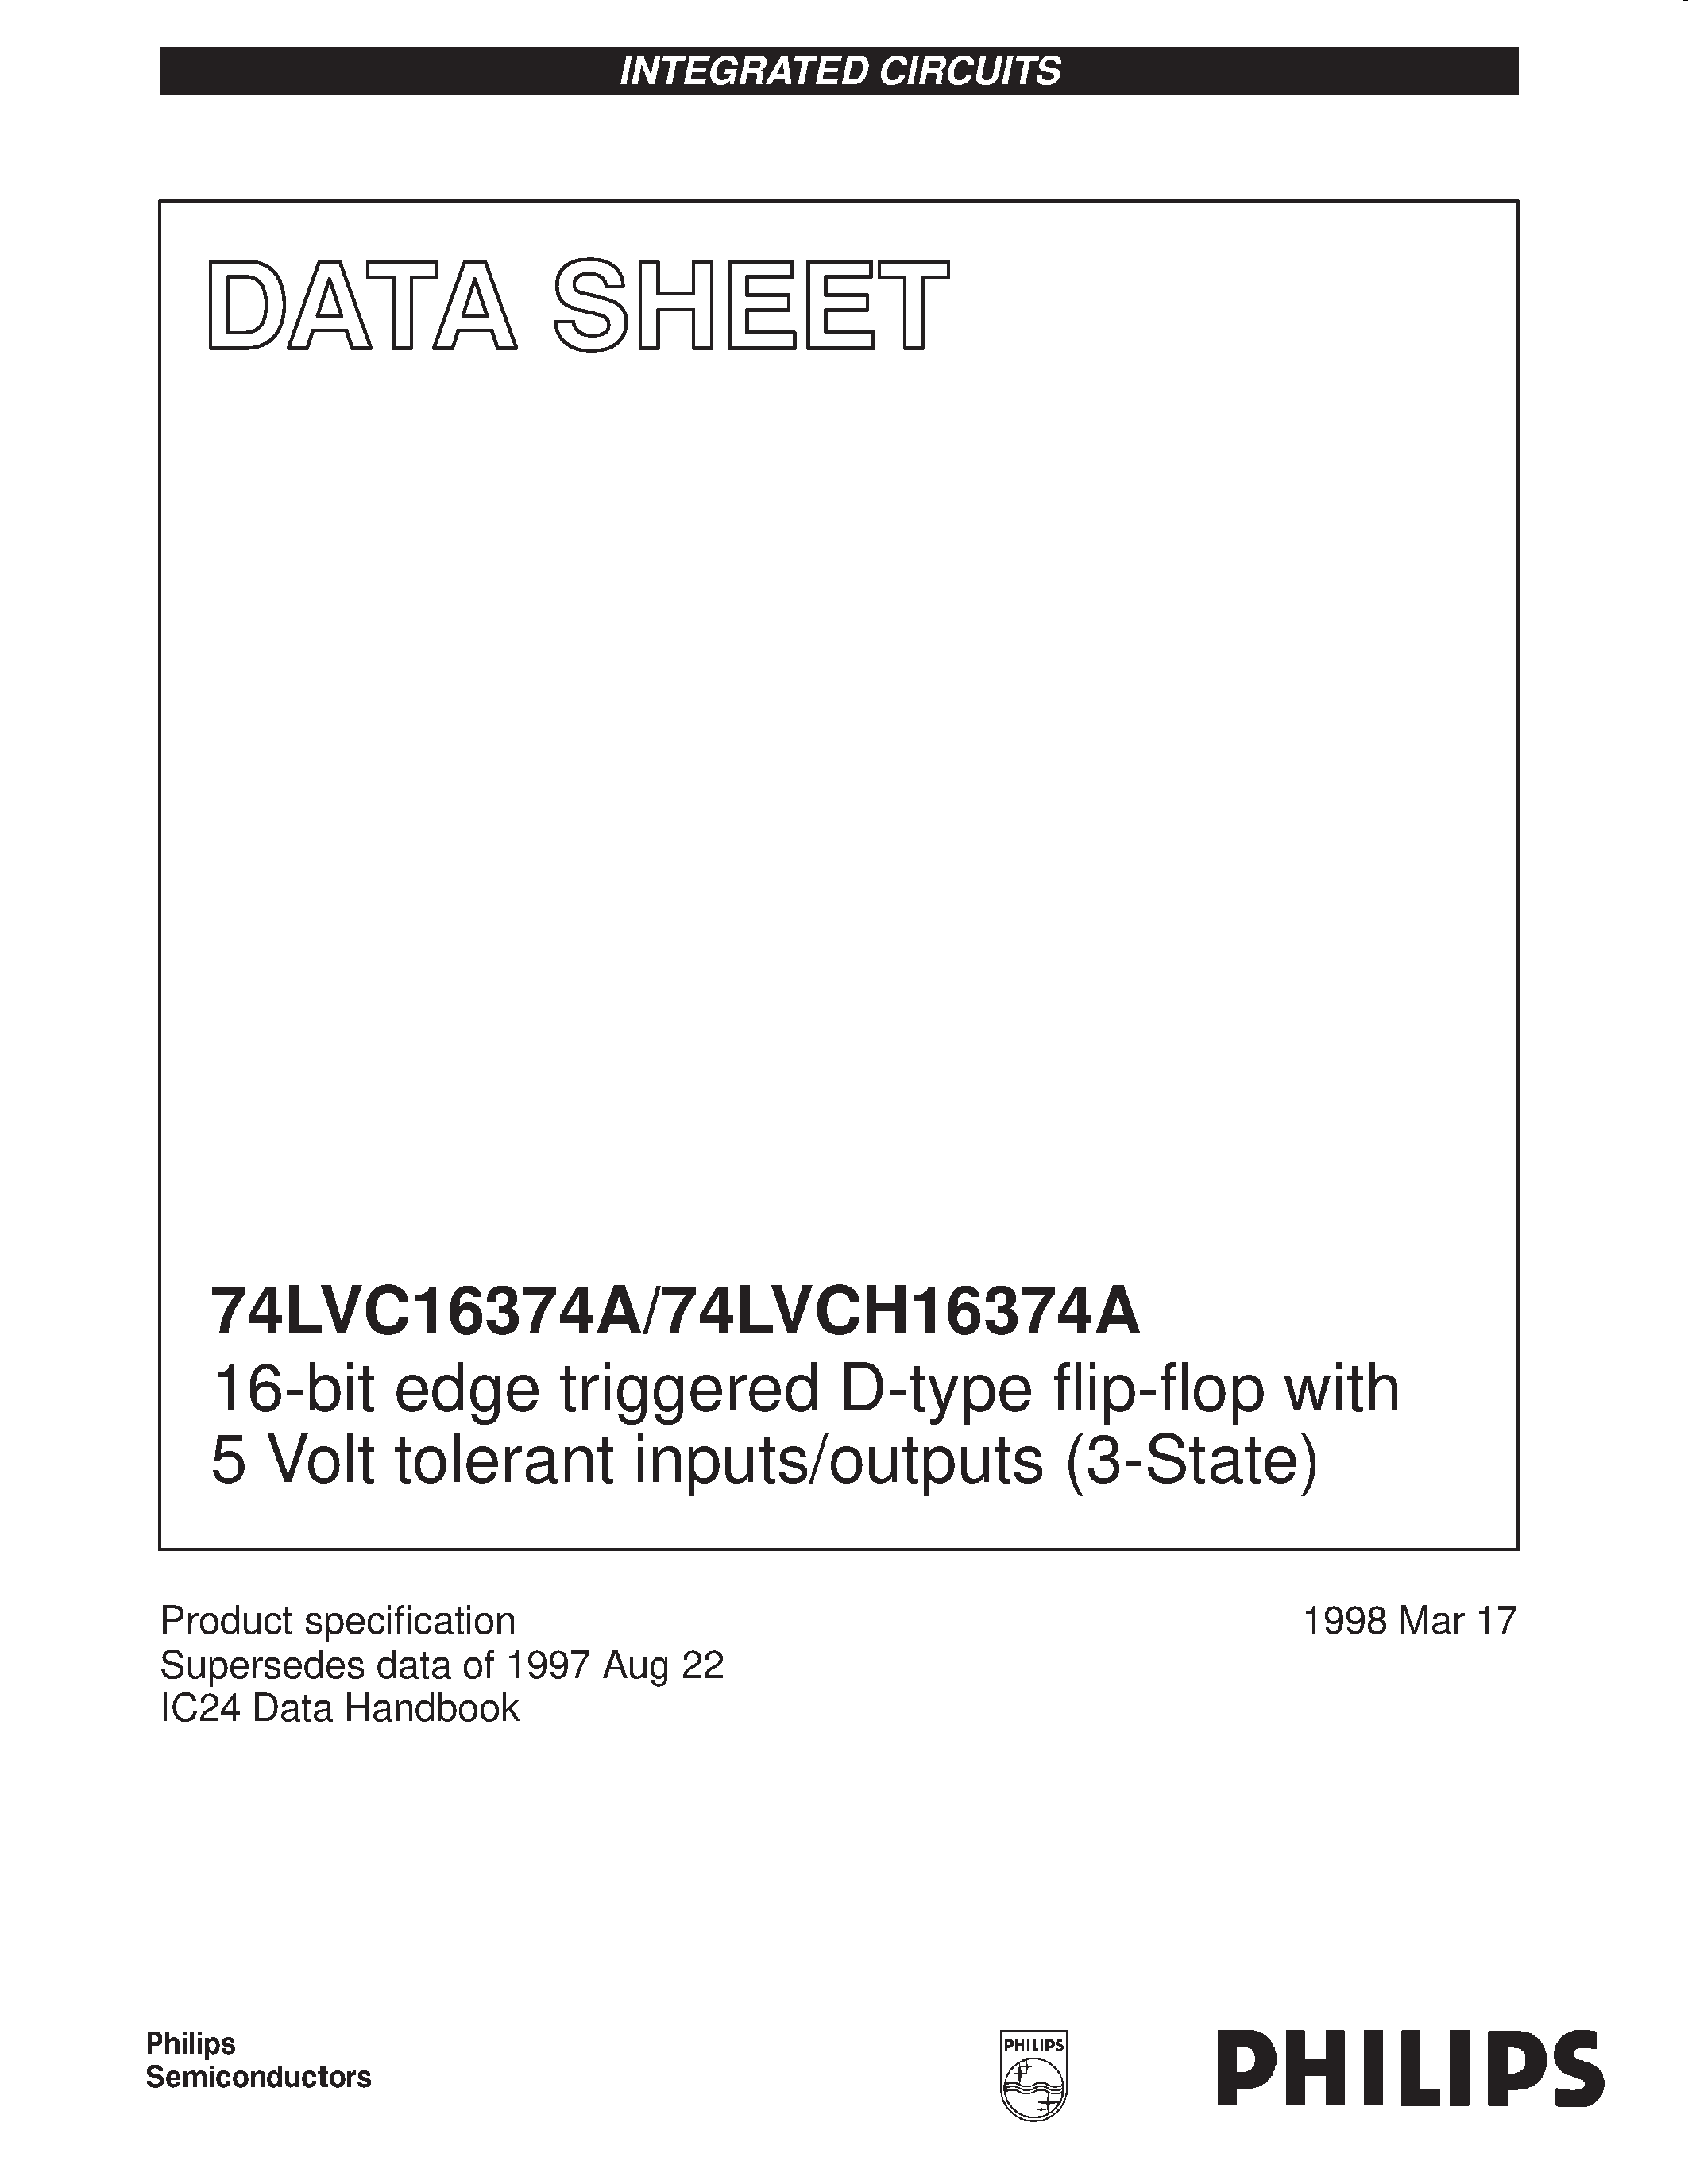 Datasheet VCH16374ADGG - 16-bit edge triggered D-type flip-flop with 5 Volt tolerant inputs/outputs 3-State page 1